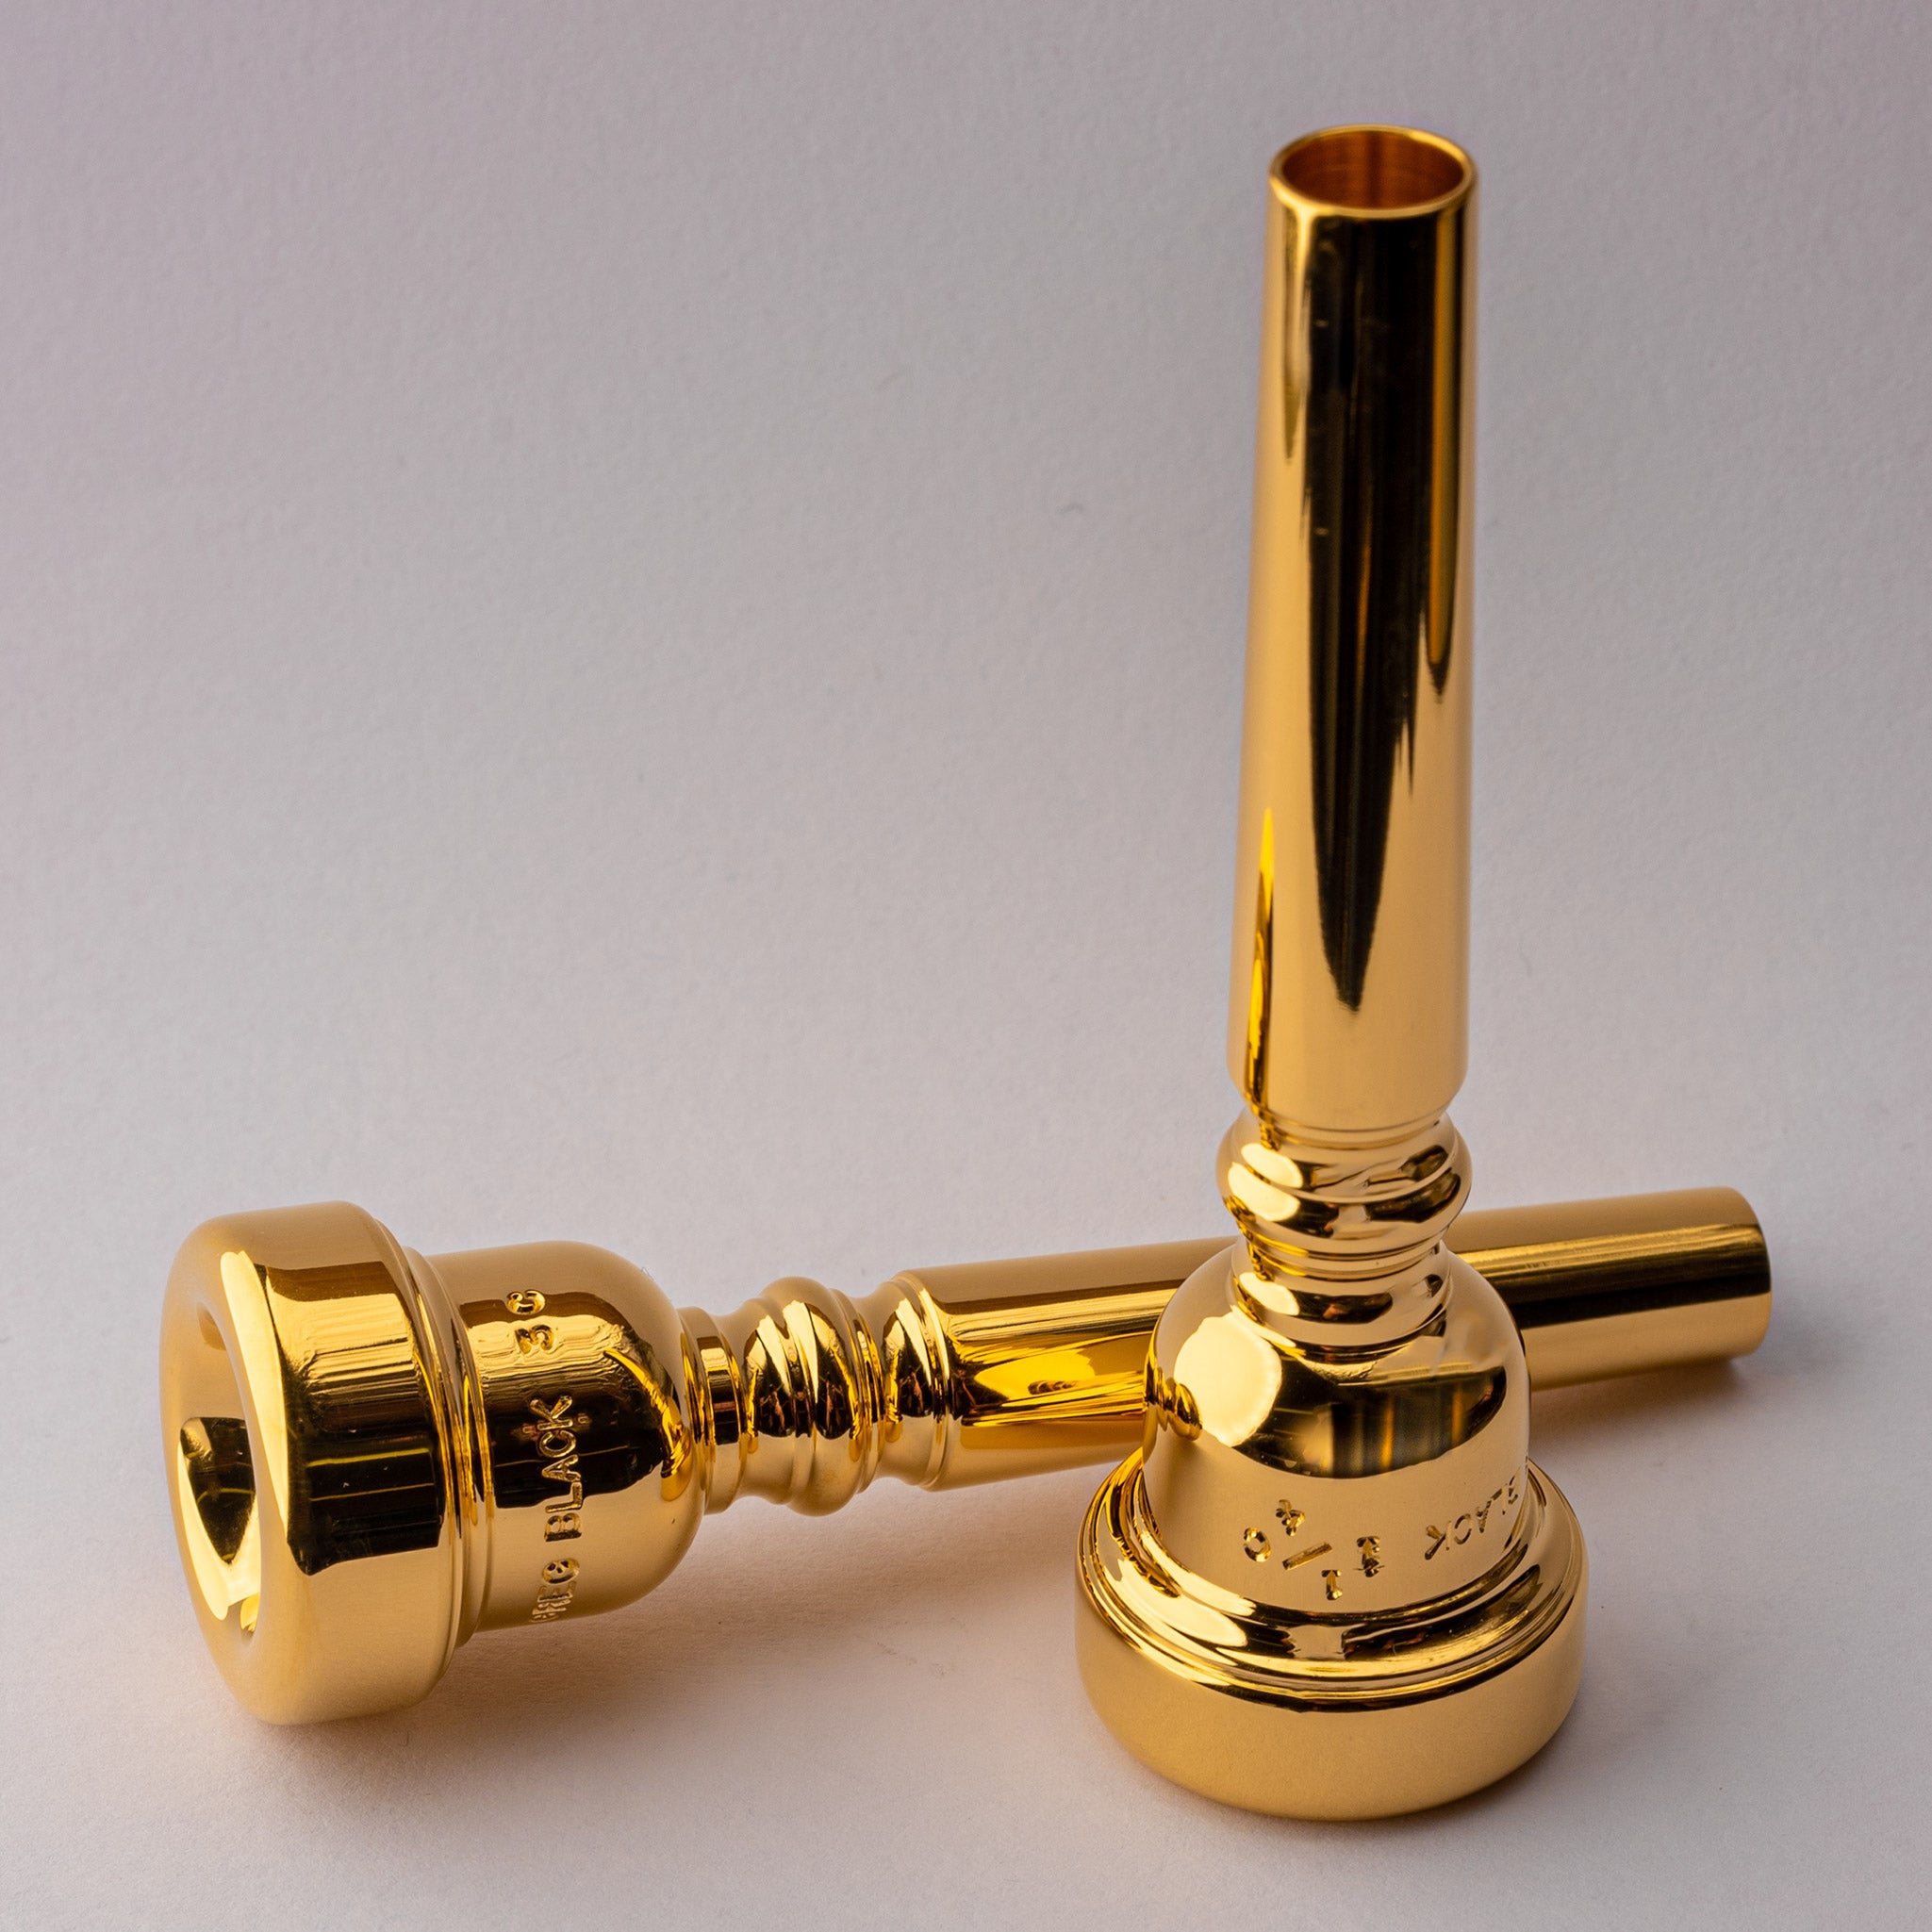 Gold Lacquer Trumpet Gold Plated Mouthpiece Stock Photo 70149070